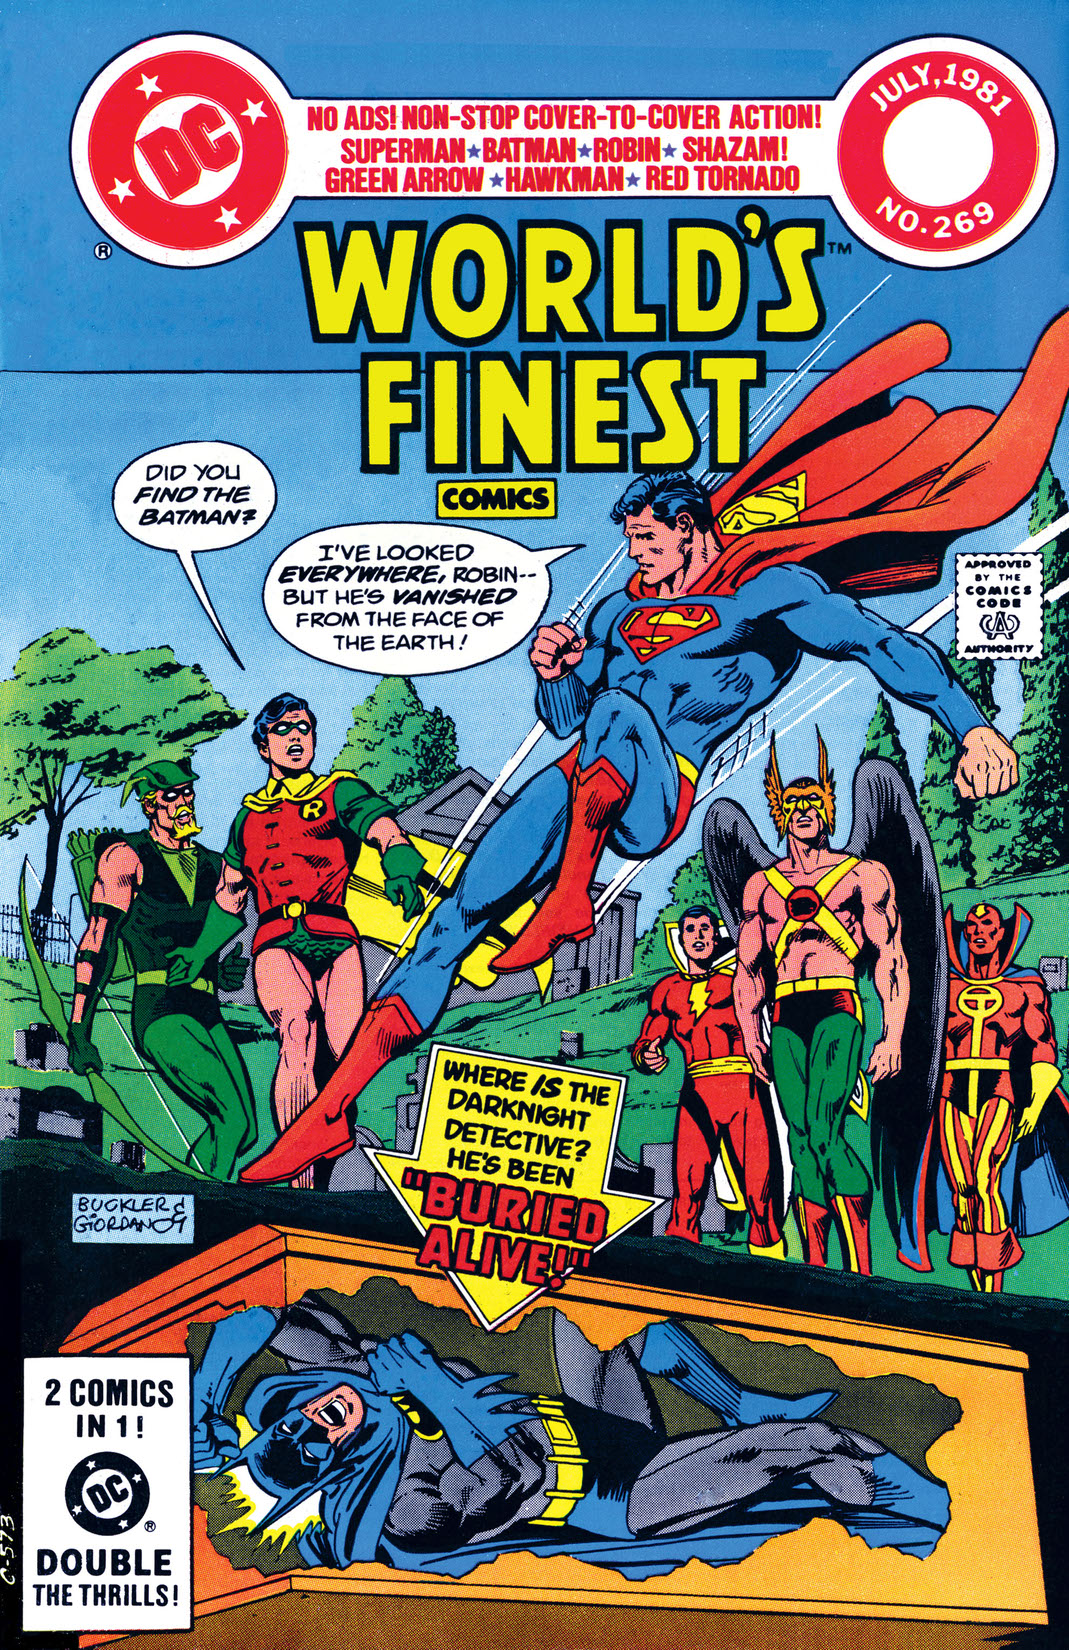 World's Finest Comics (1941-) #269 preview images